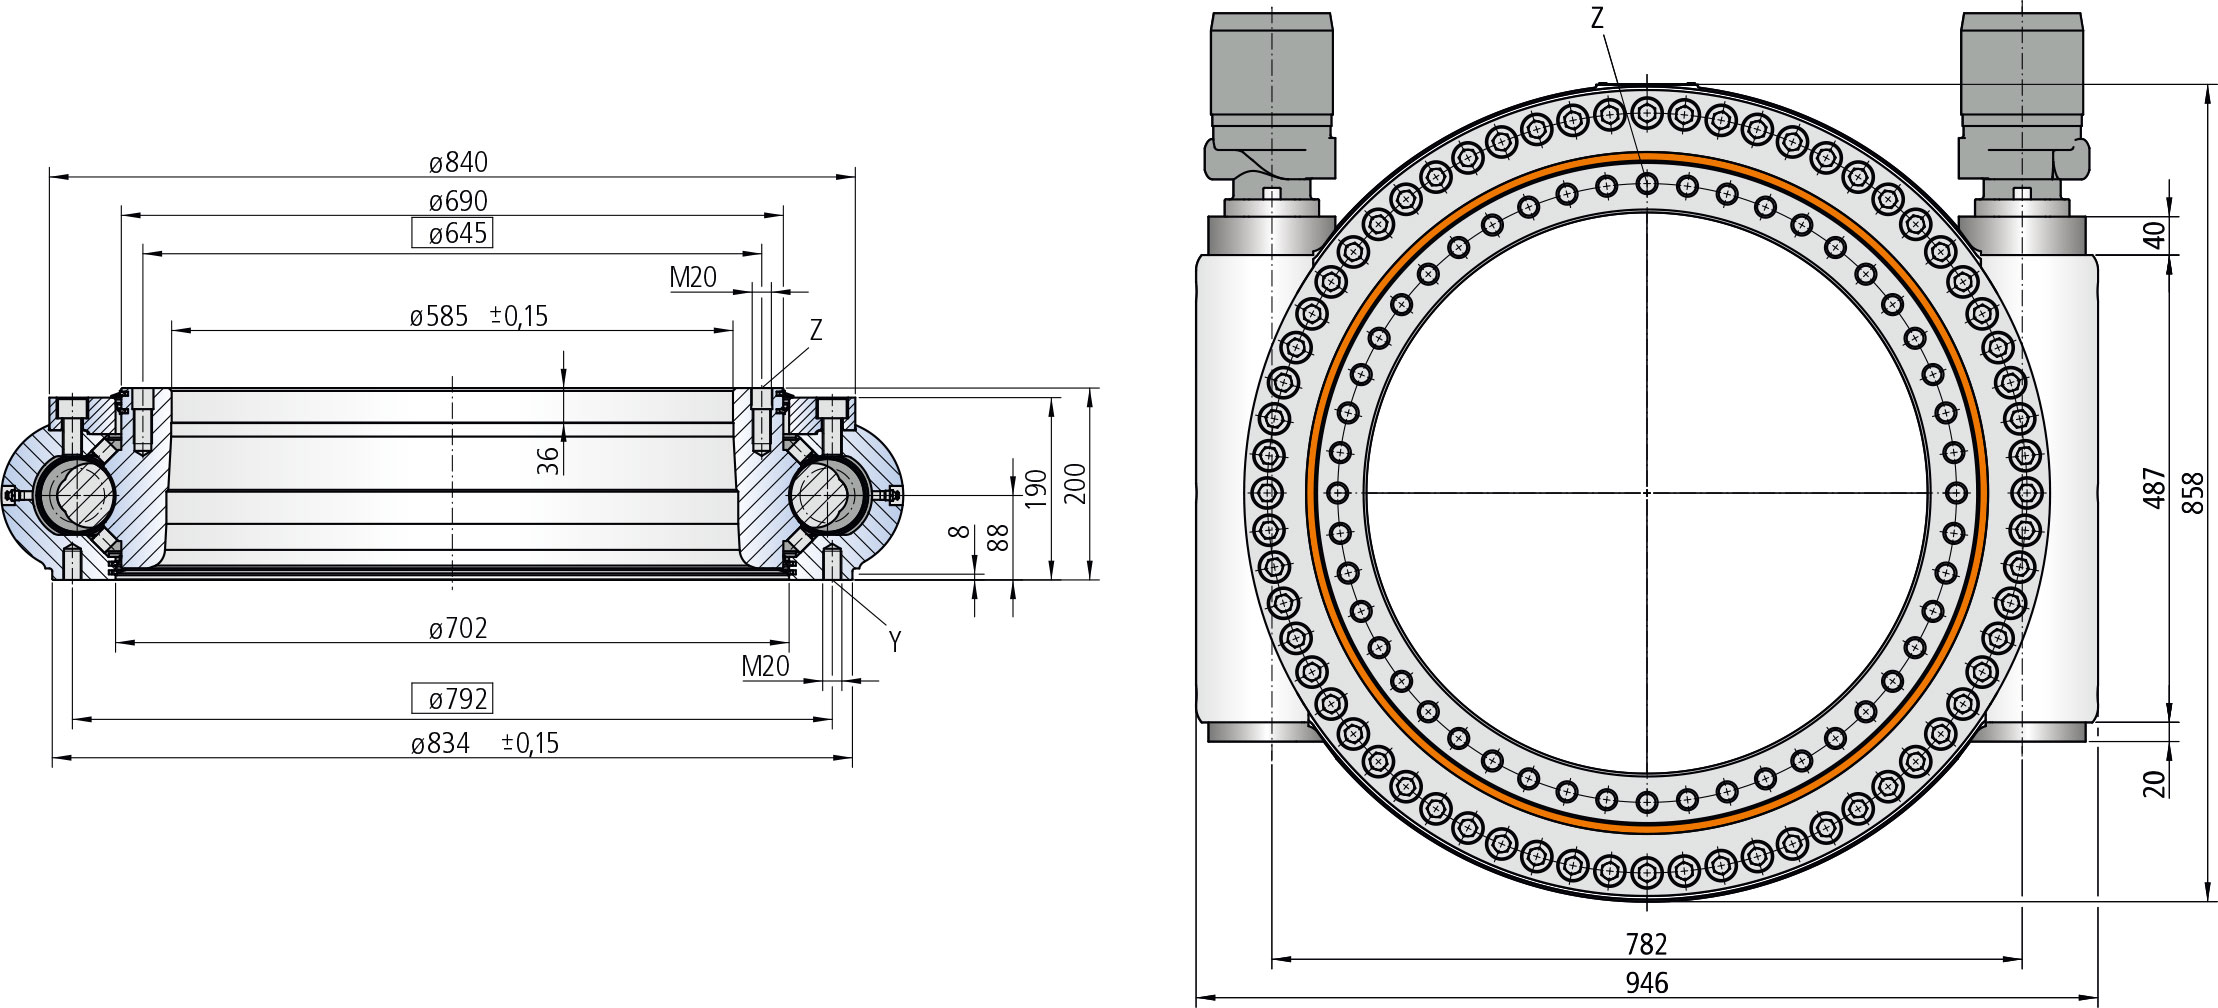 WD-H 0645 / 2 drive WD-H Series cad drawing